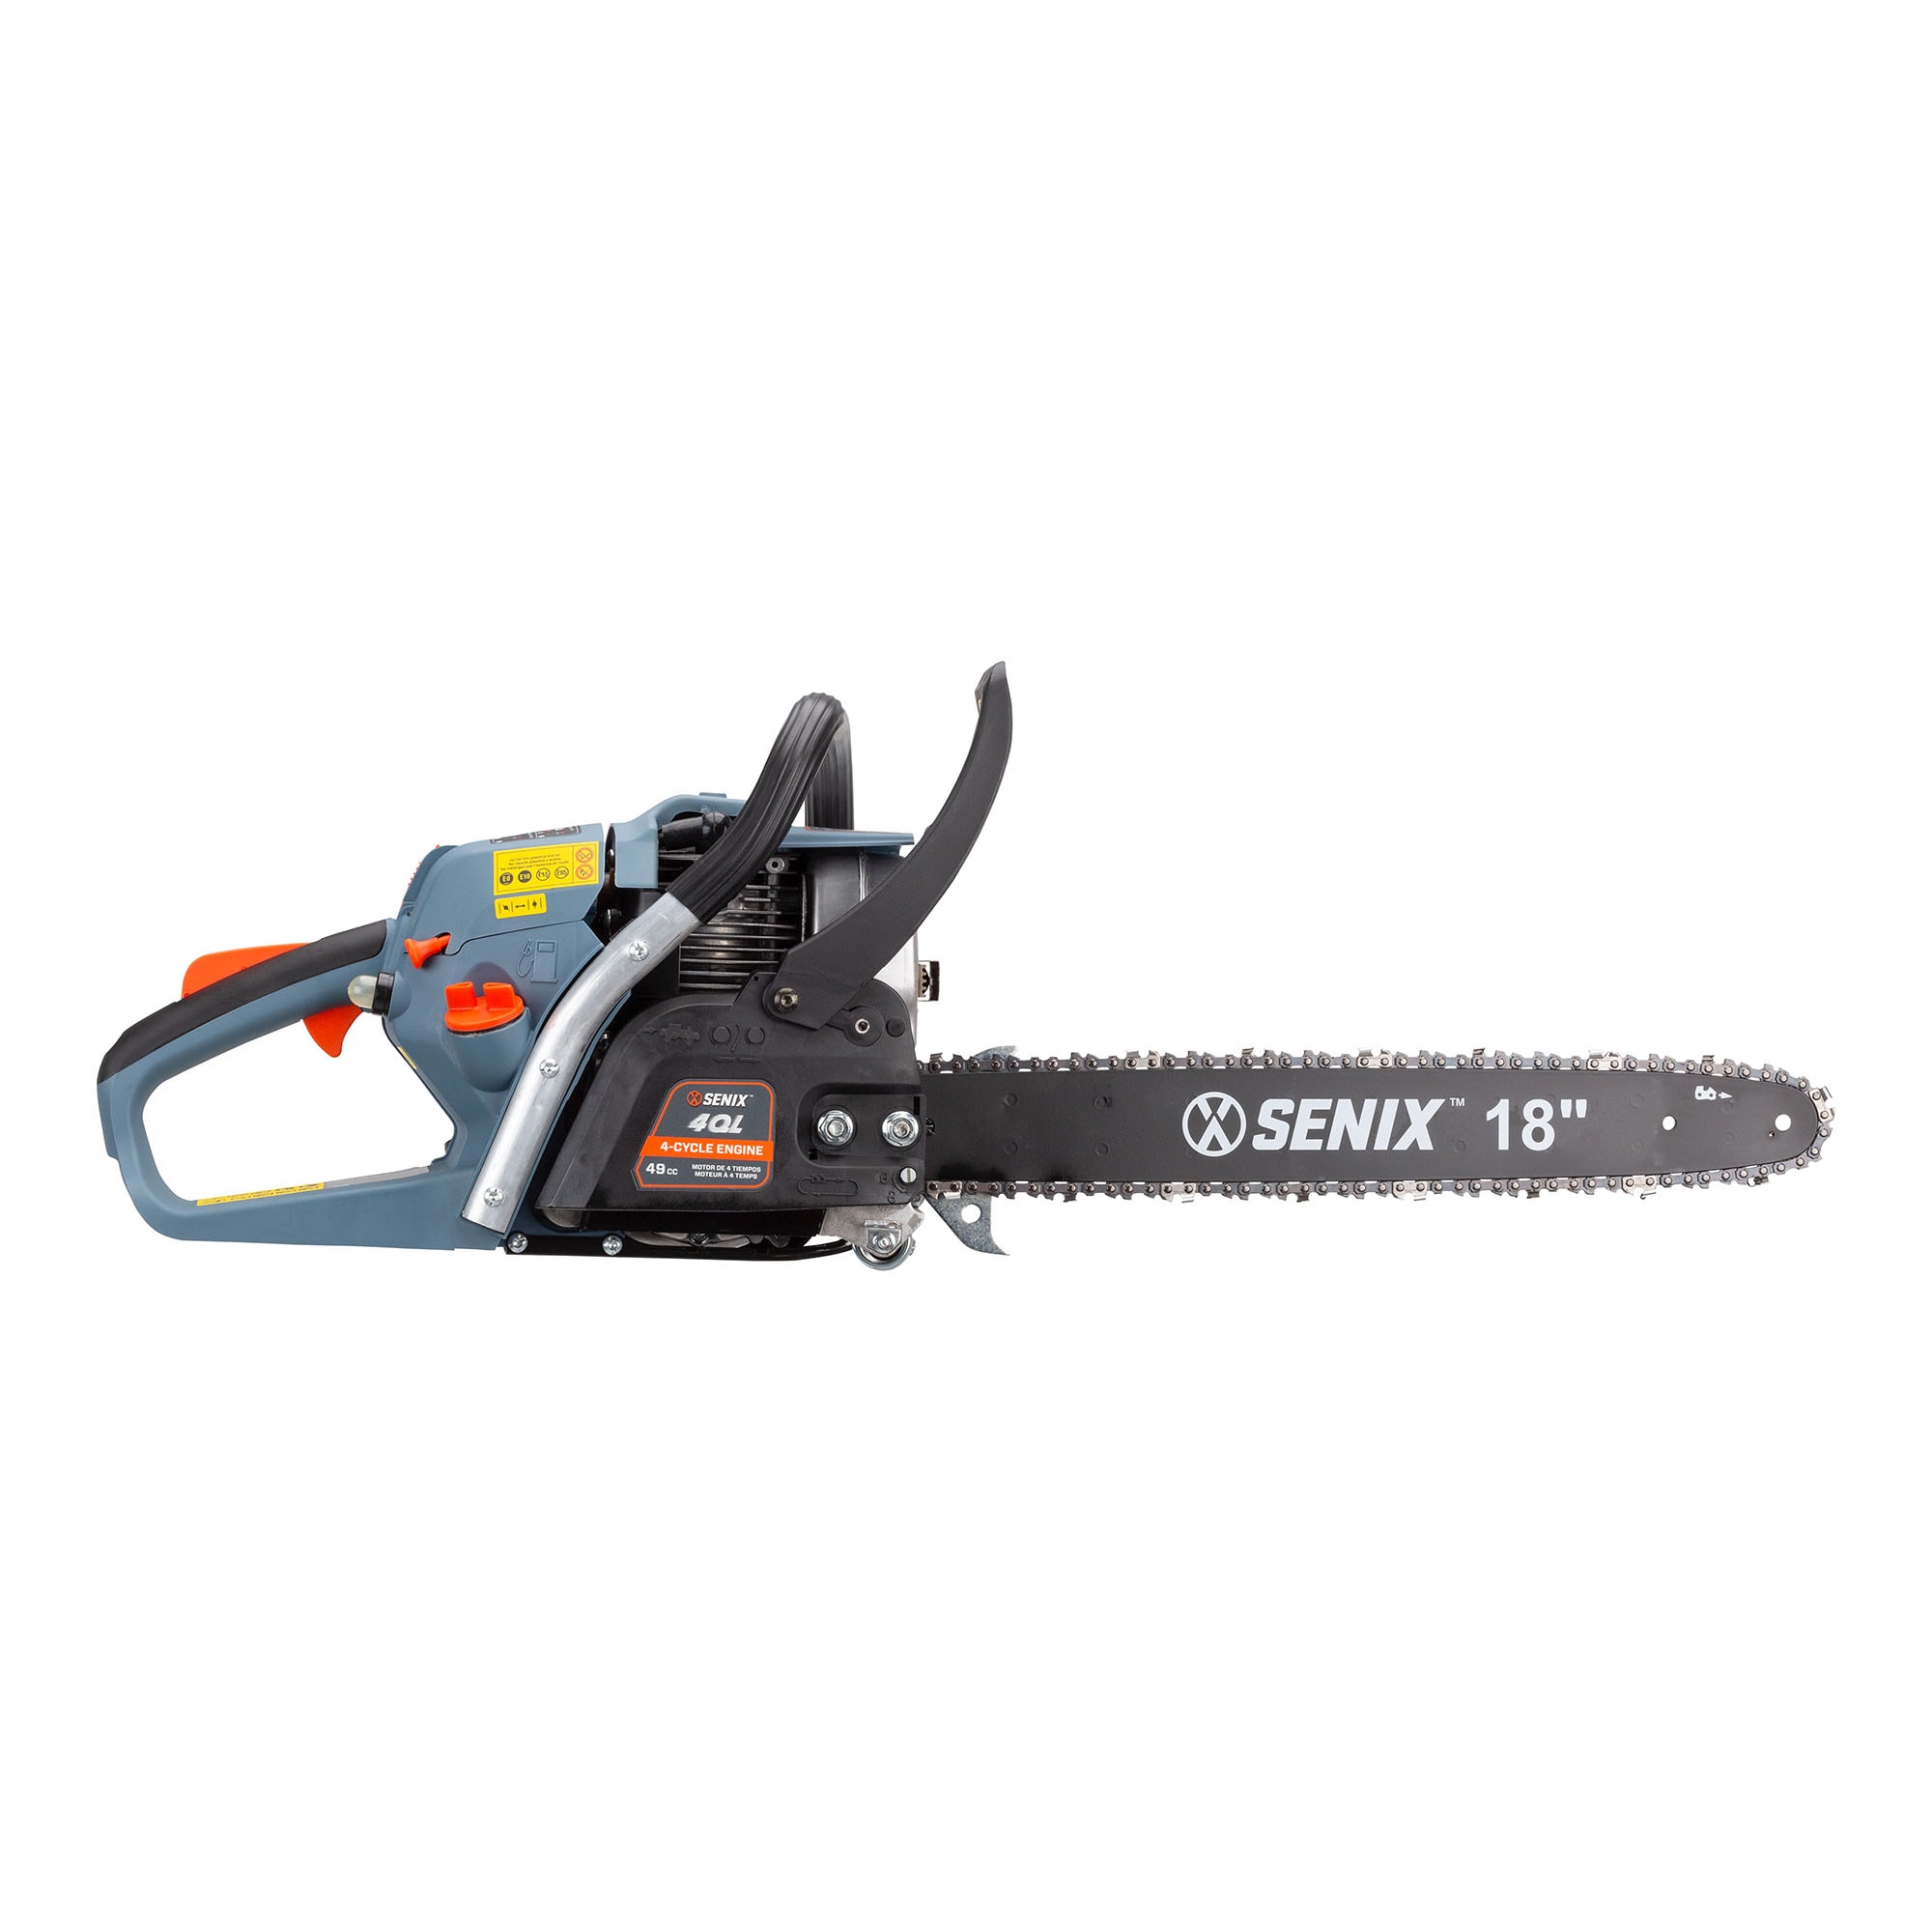 SENIX 4QL 49-cc 4-cycle 18-in Gas Chainsaw at Lowes.com